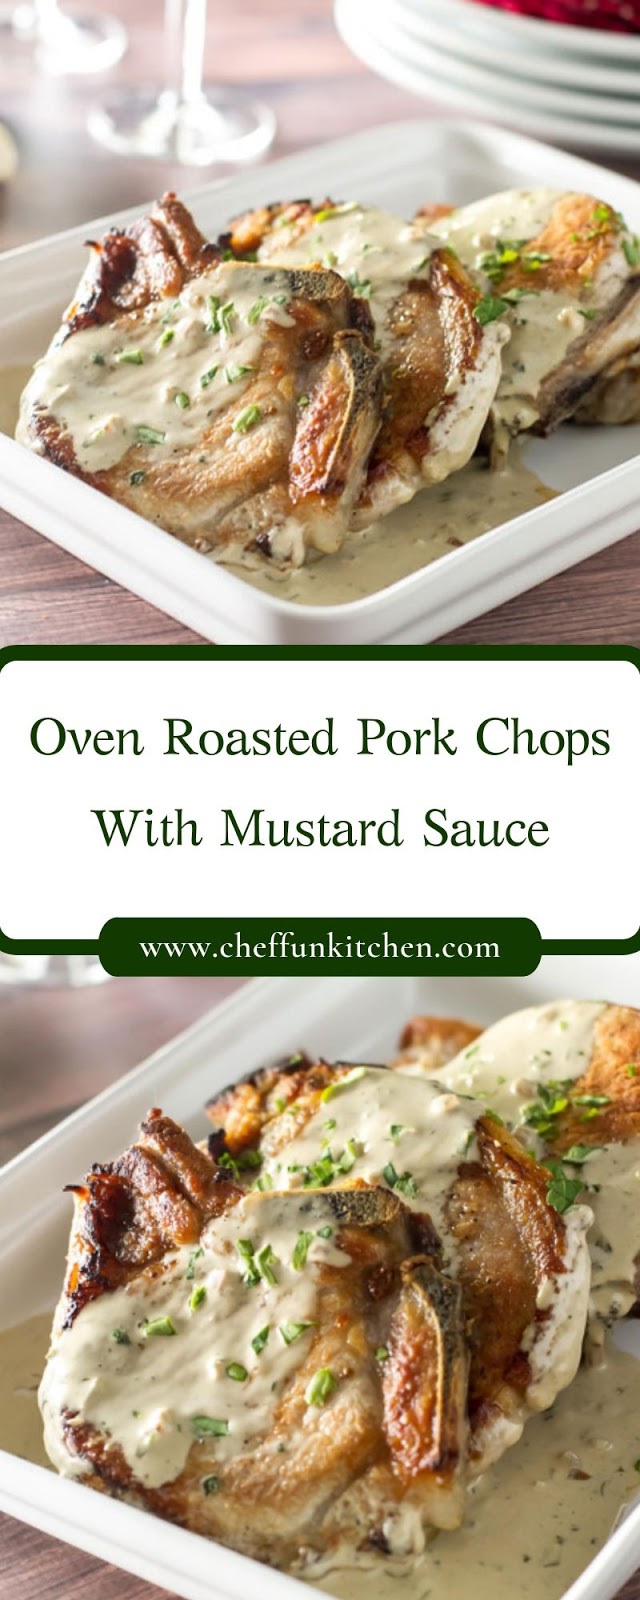 Oven Roasted Pork Chops With Mustard Sauce